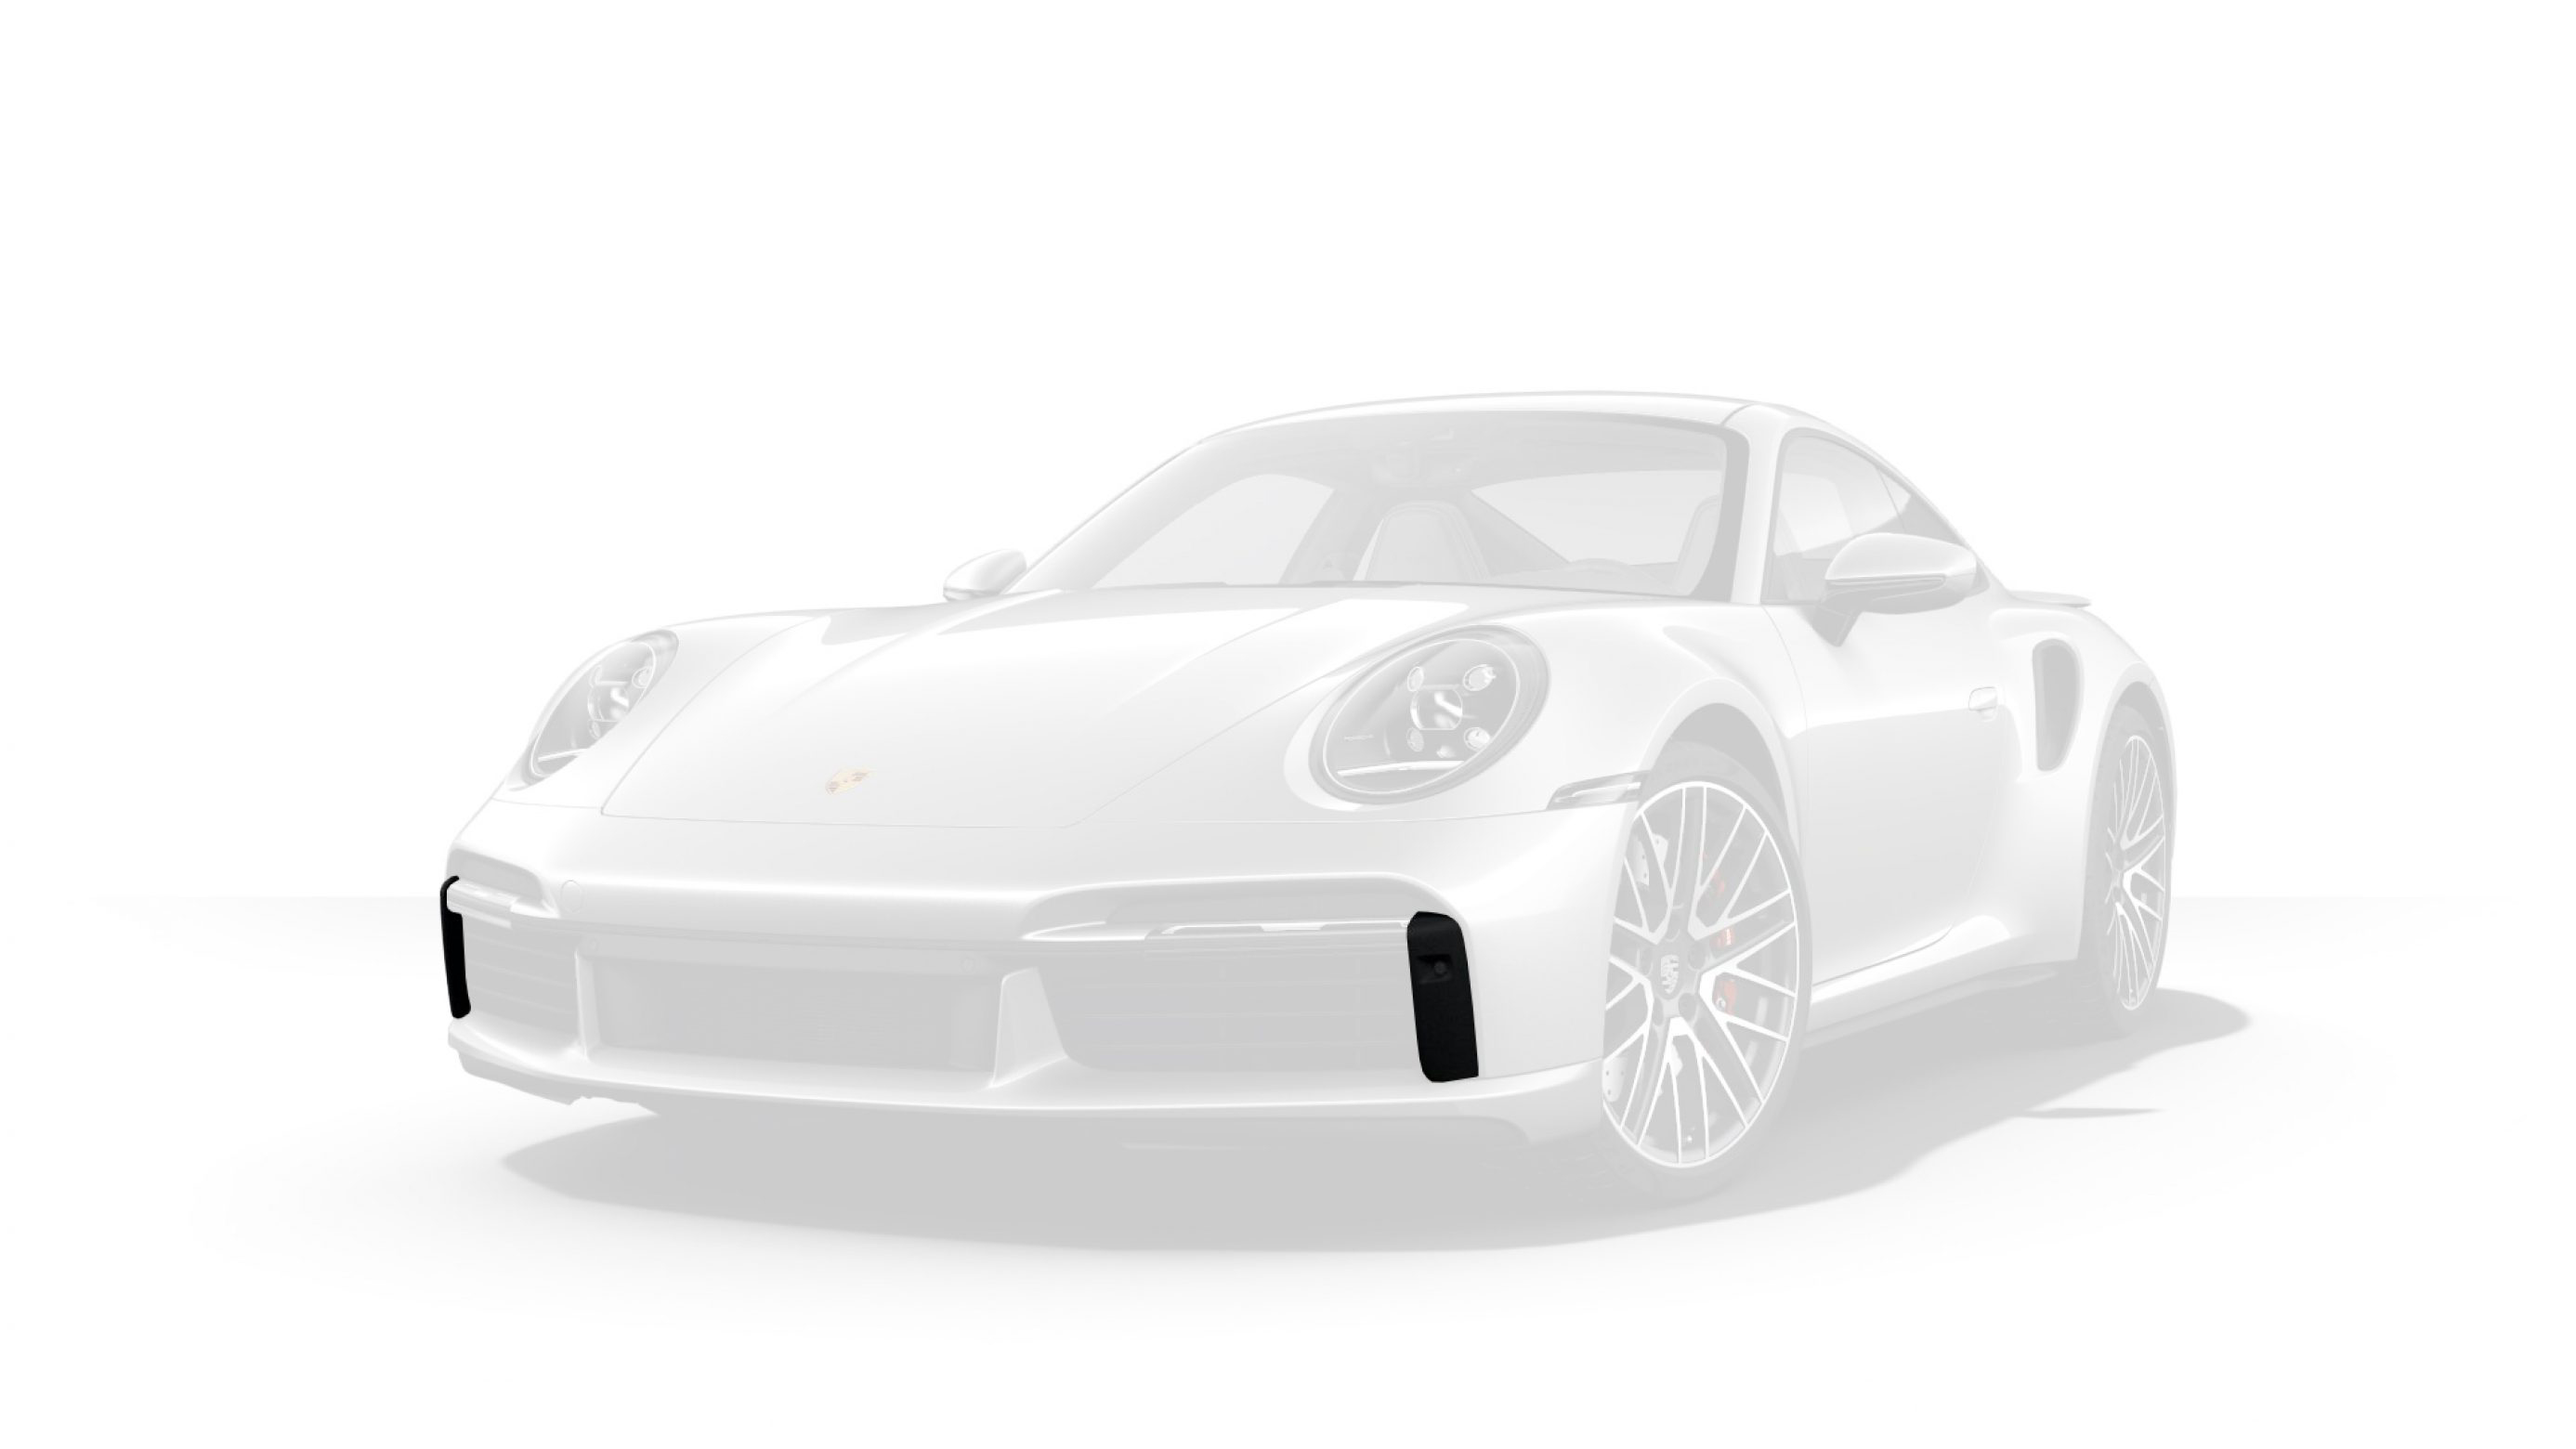 Check our price and buy Carbon Fiber Body kit set for Porsche 911 Turbo S